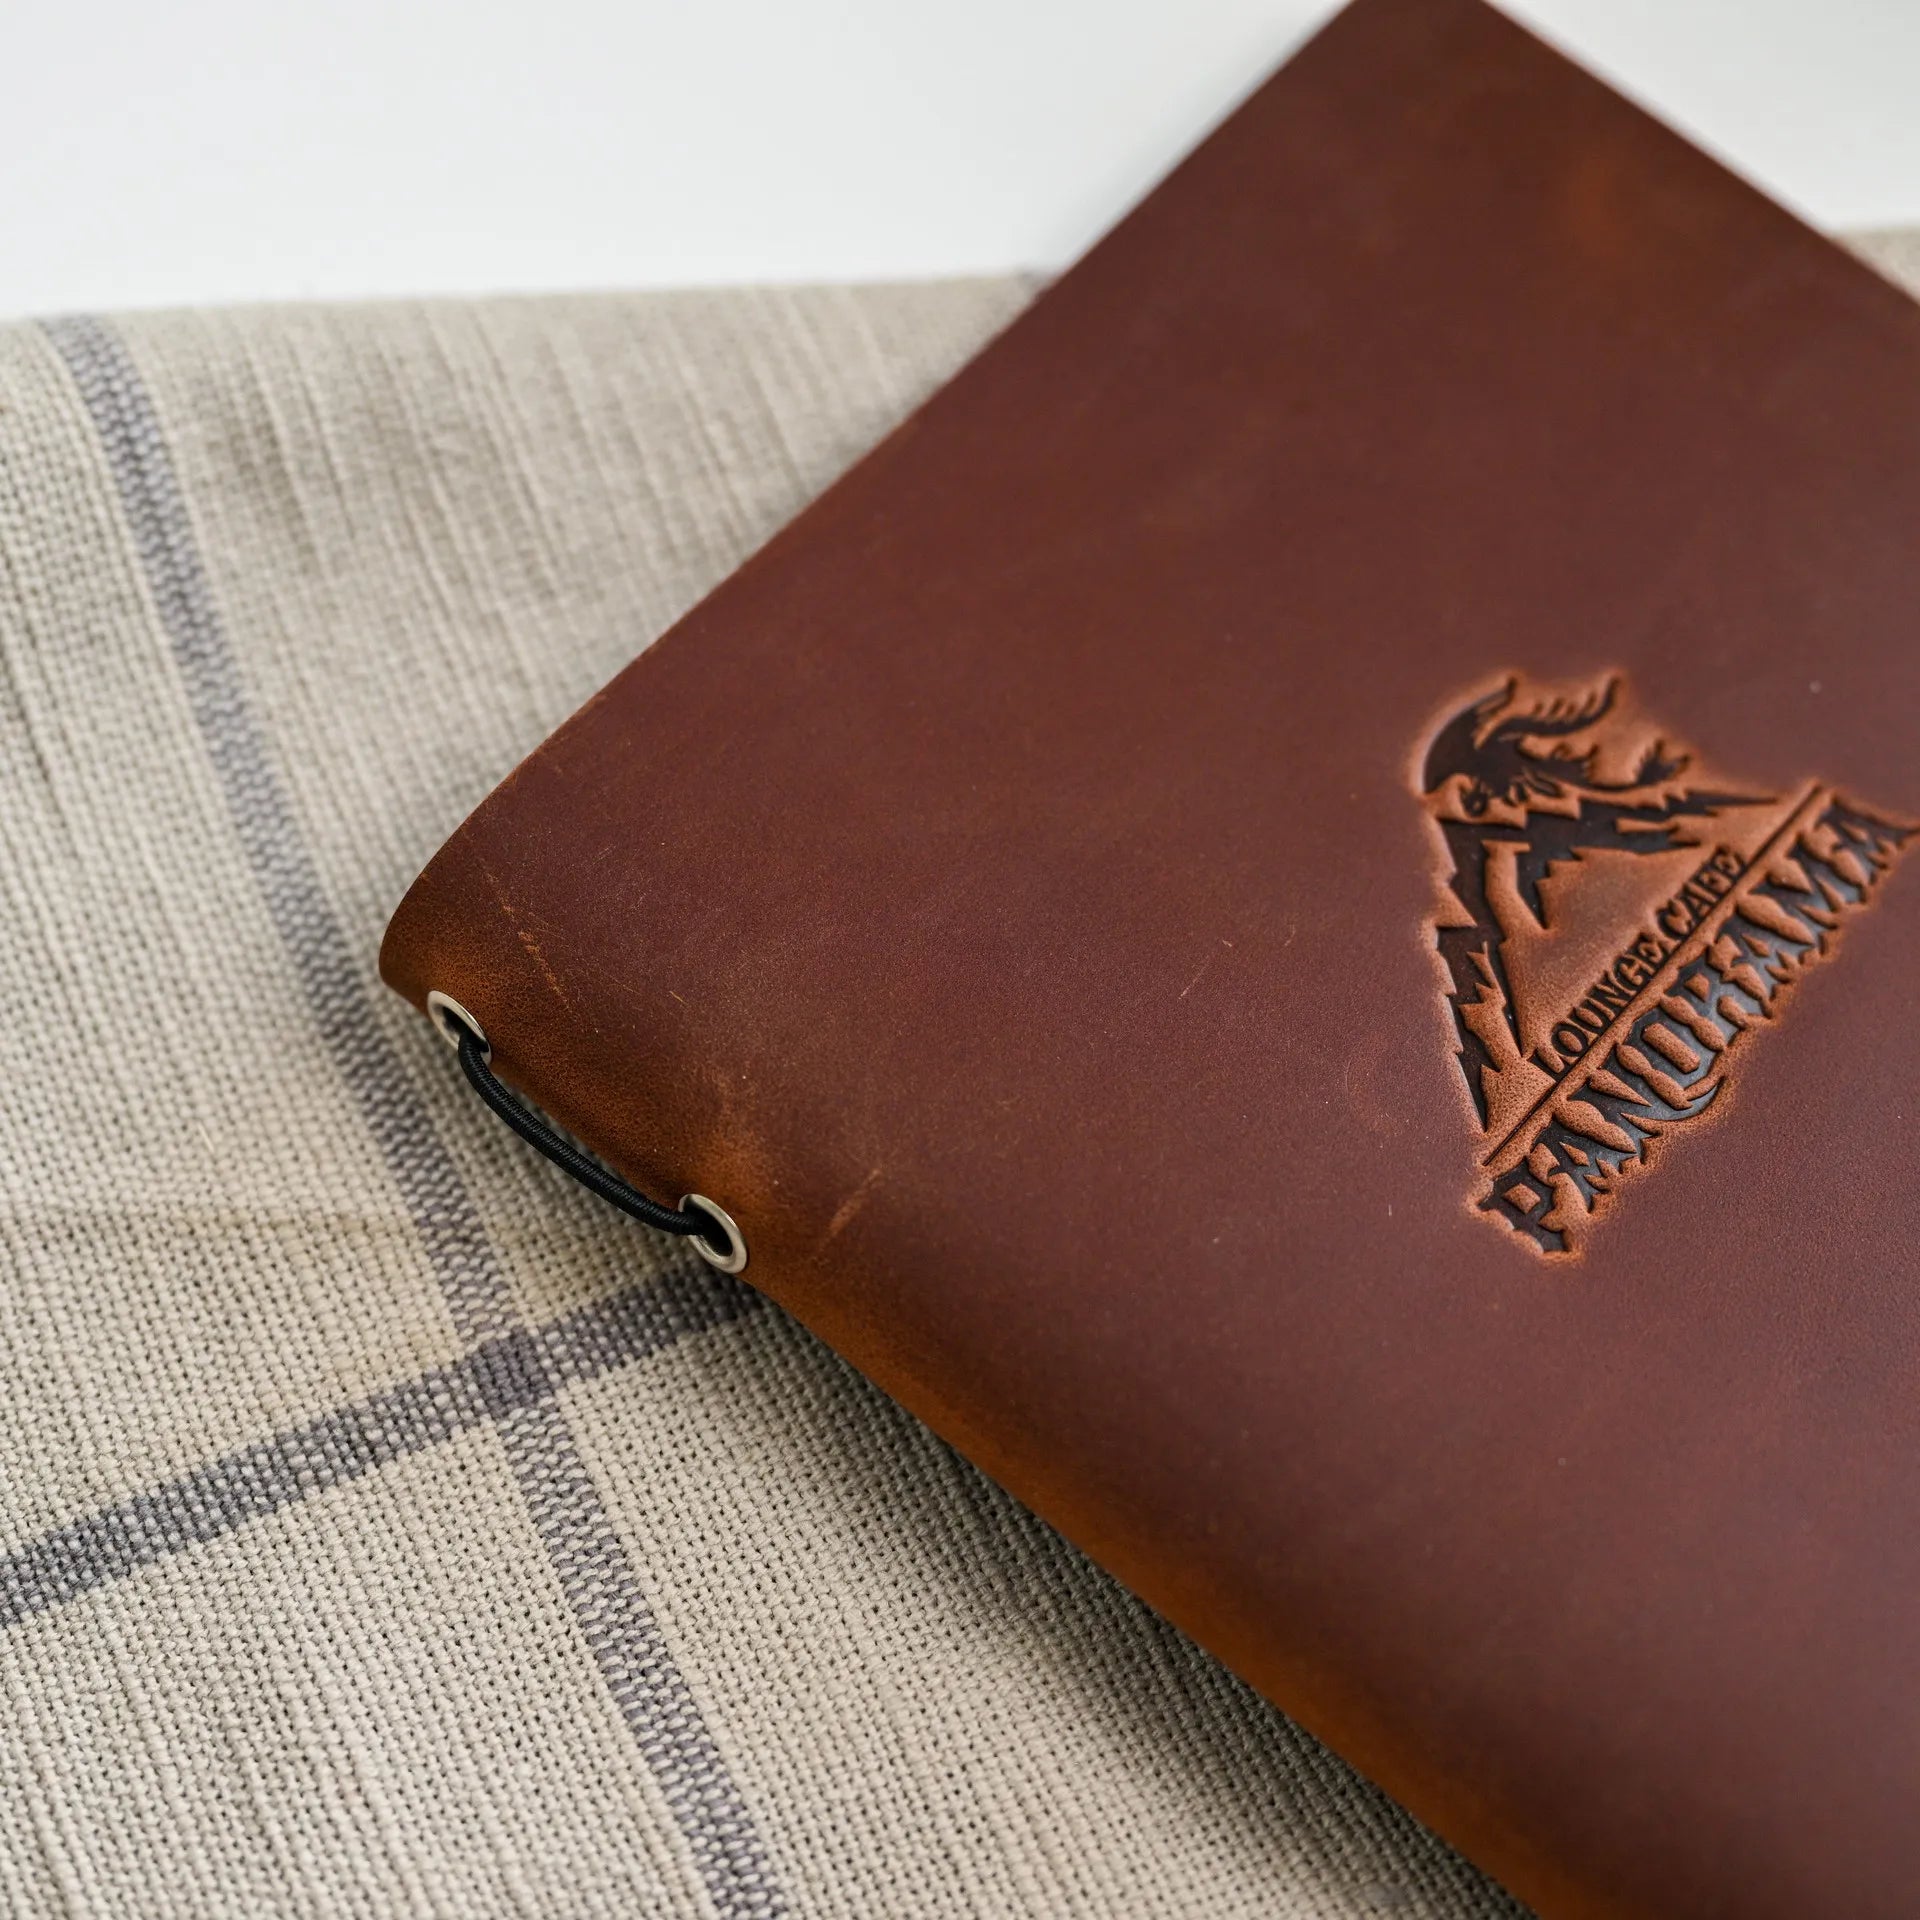 Impress guests with our personalized leather menu cover, featuring an elegant design and secure elastic band.